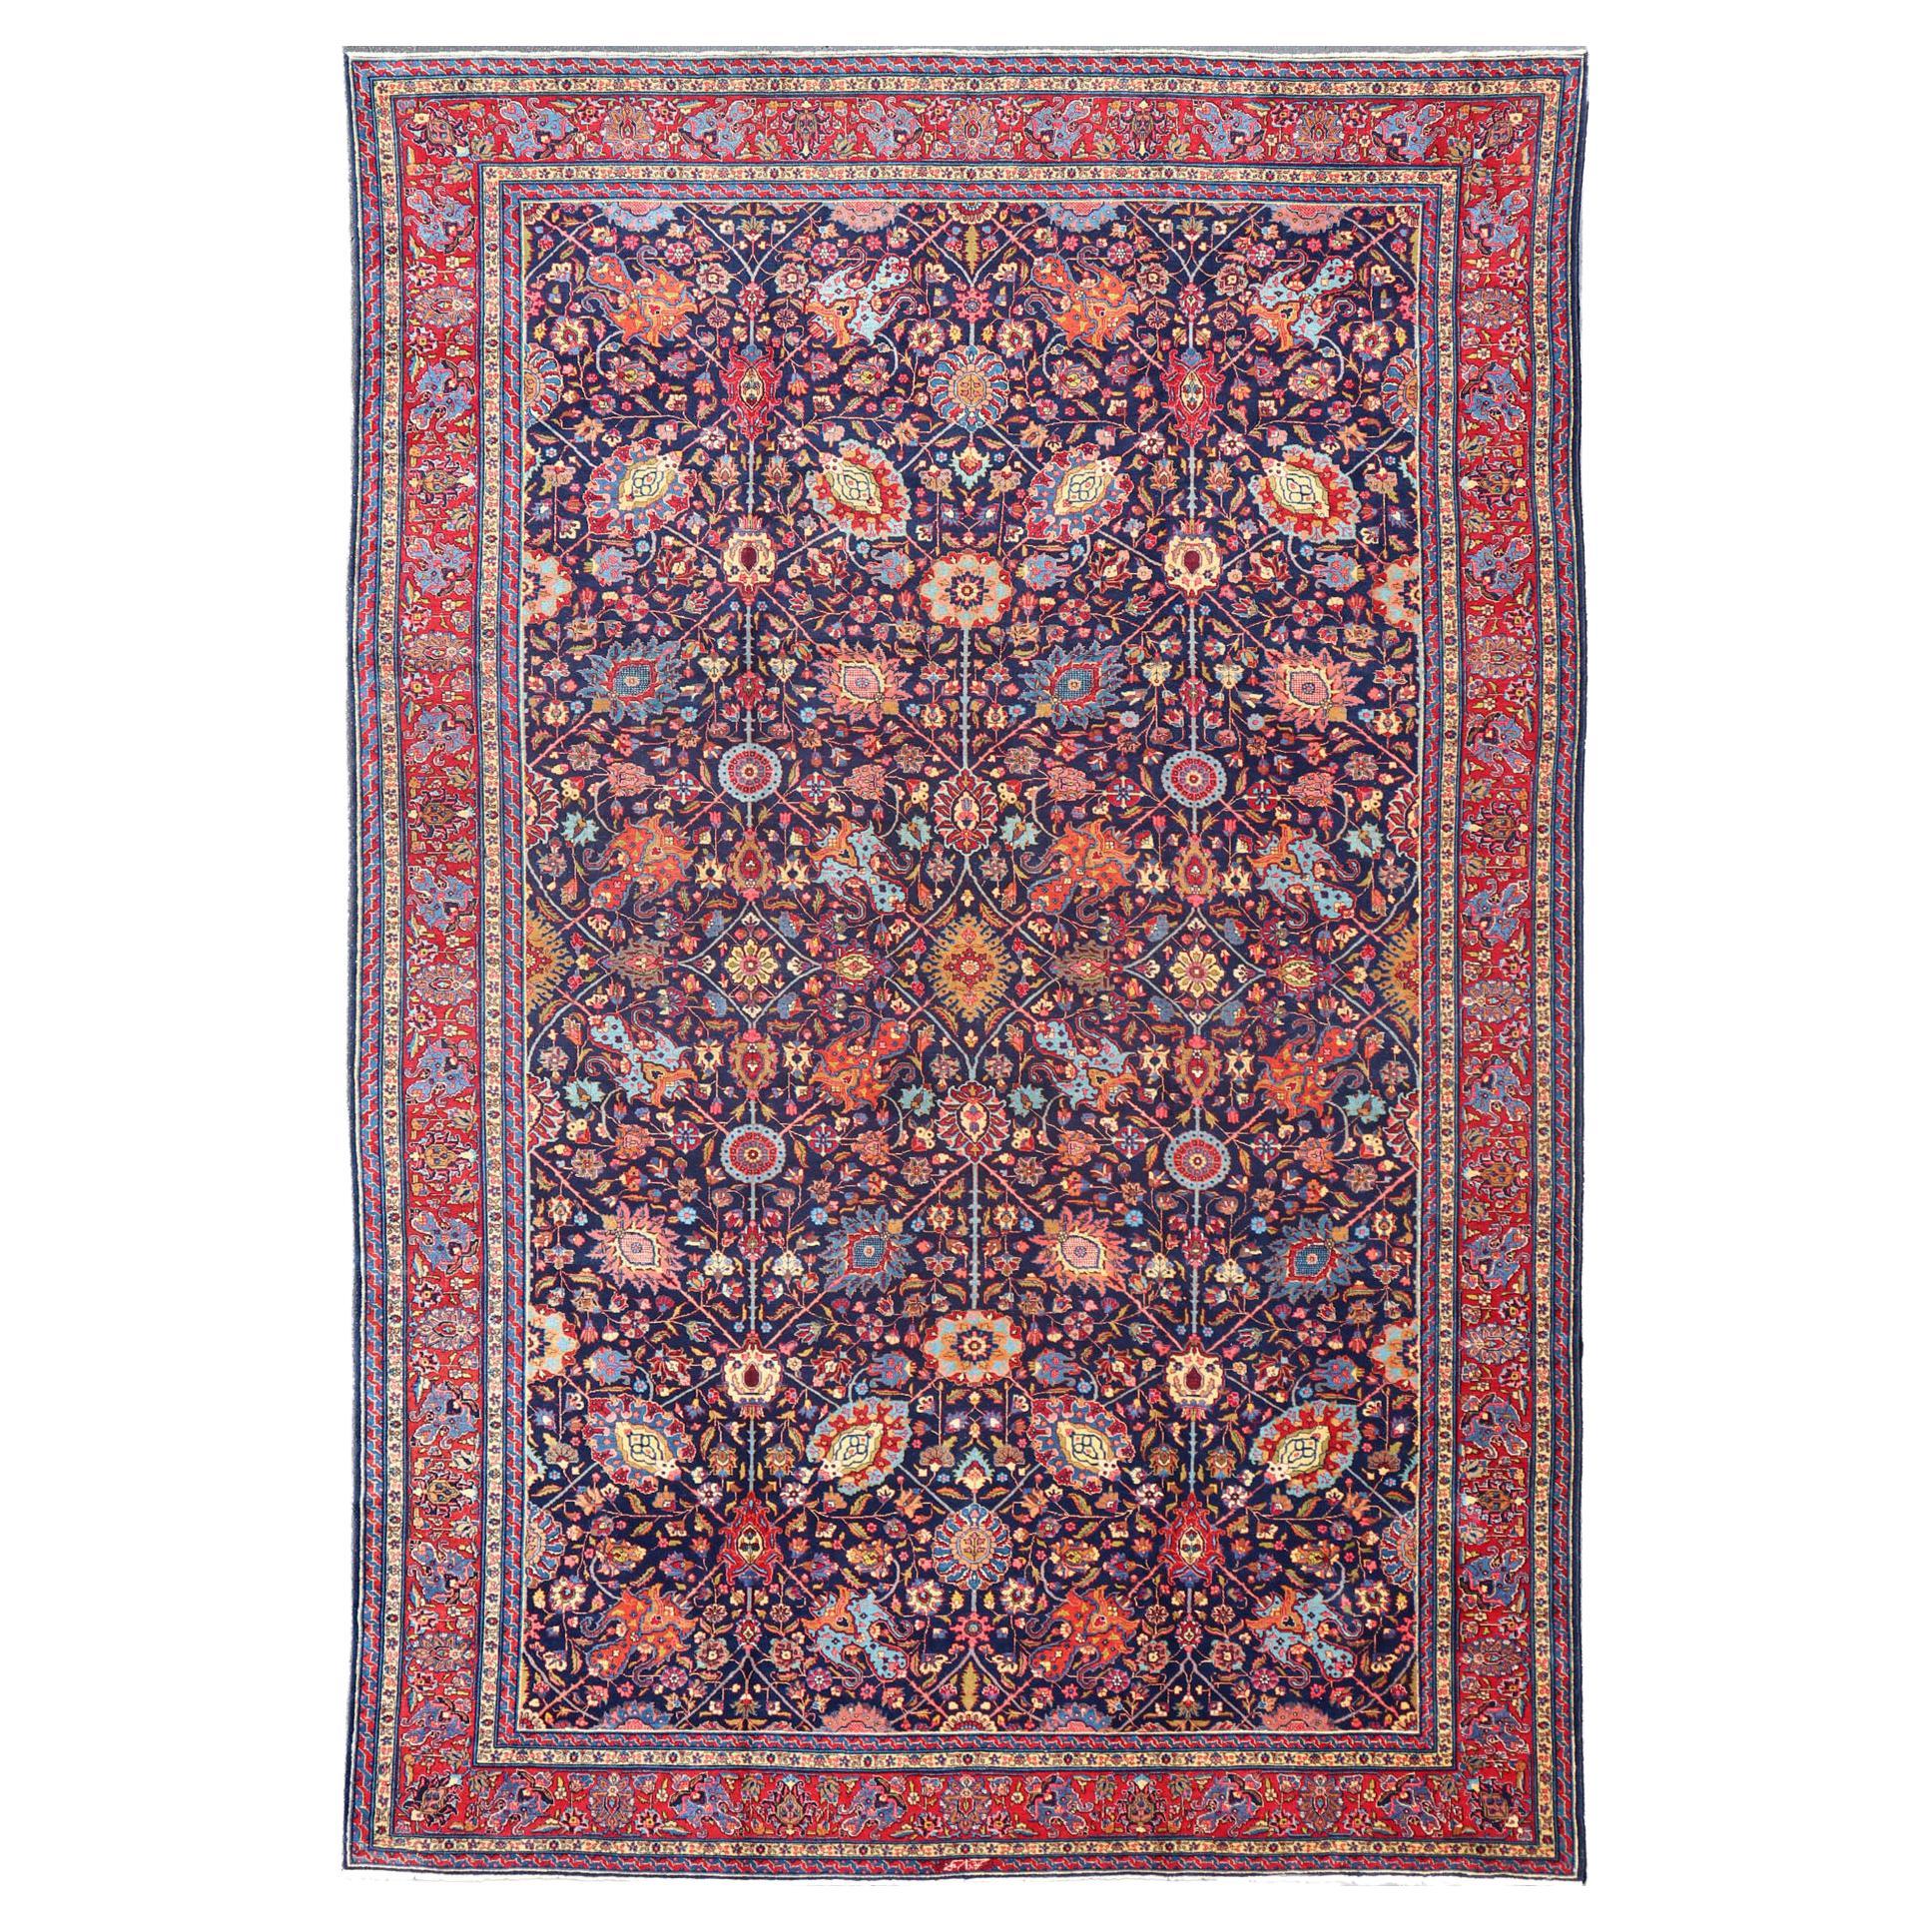 Large Antique Persian Tabriz Rug with All-Over Sub-Geometric and Colorful Design